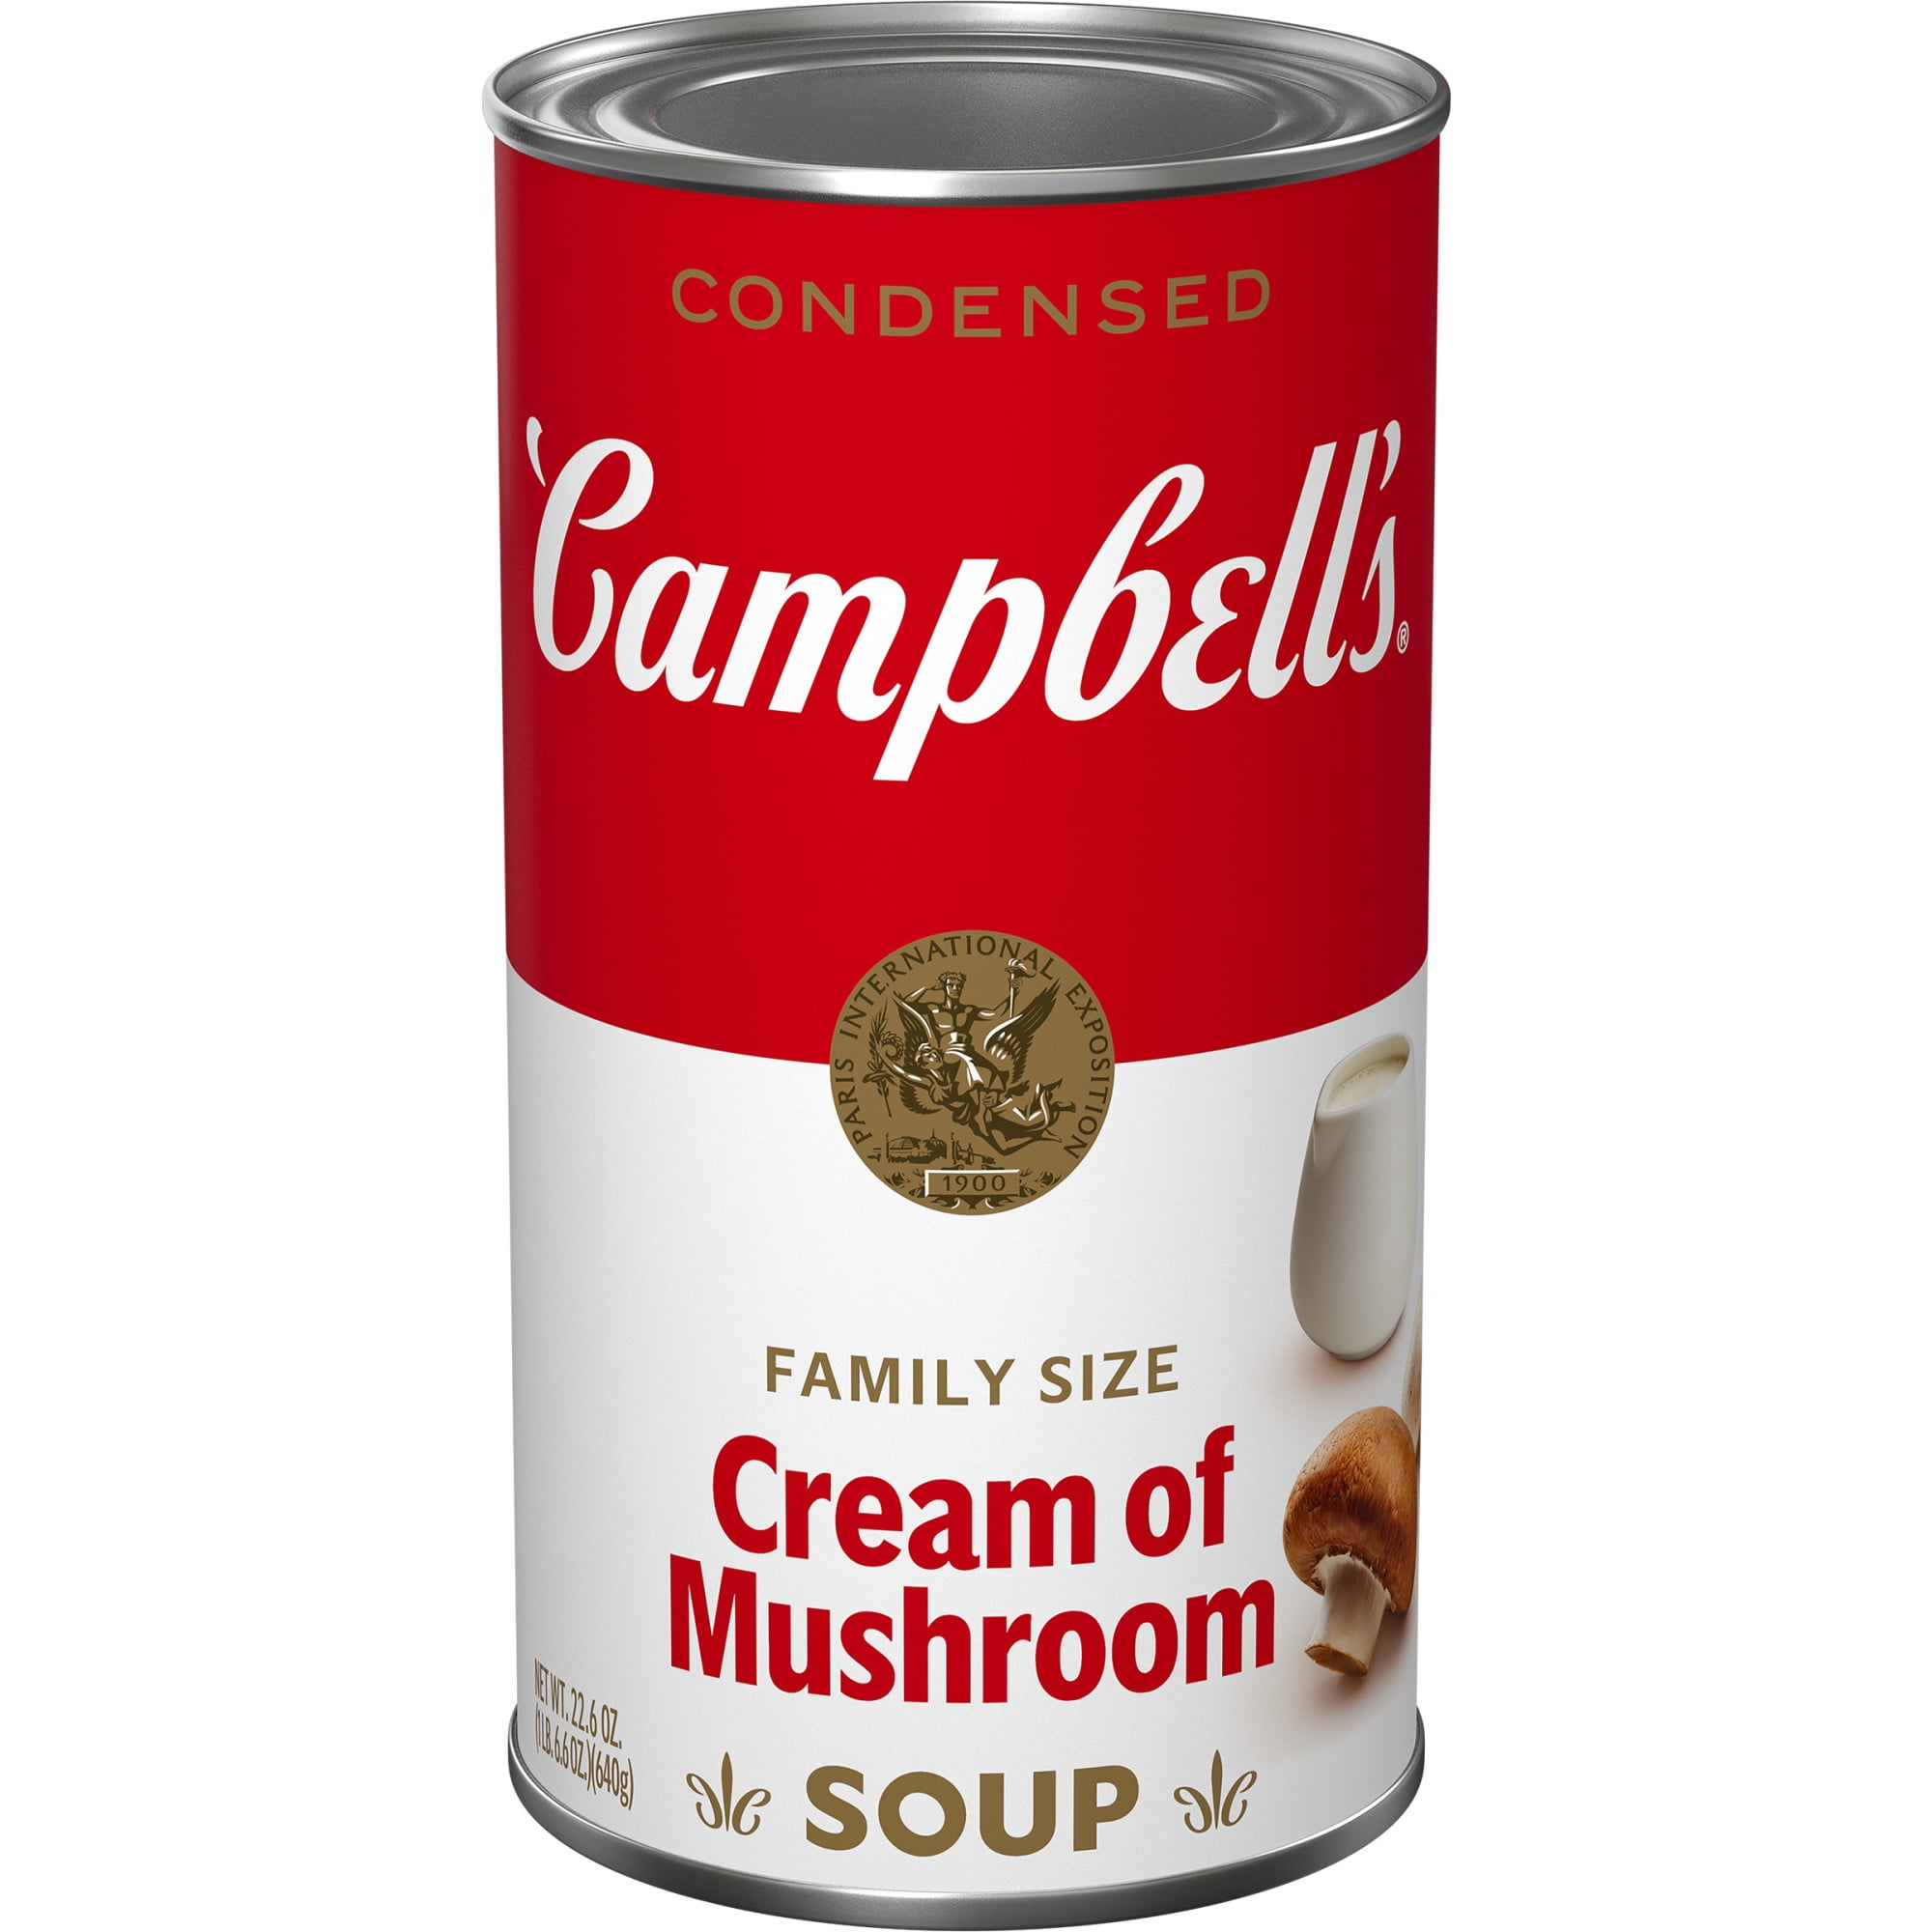 Campbell's Condensed Family Size Cream of Mushroom Soup, 22.6 oz.